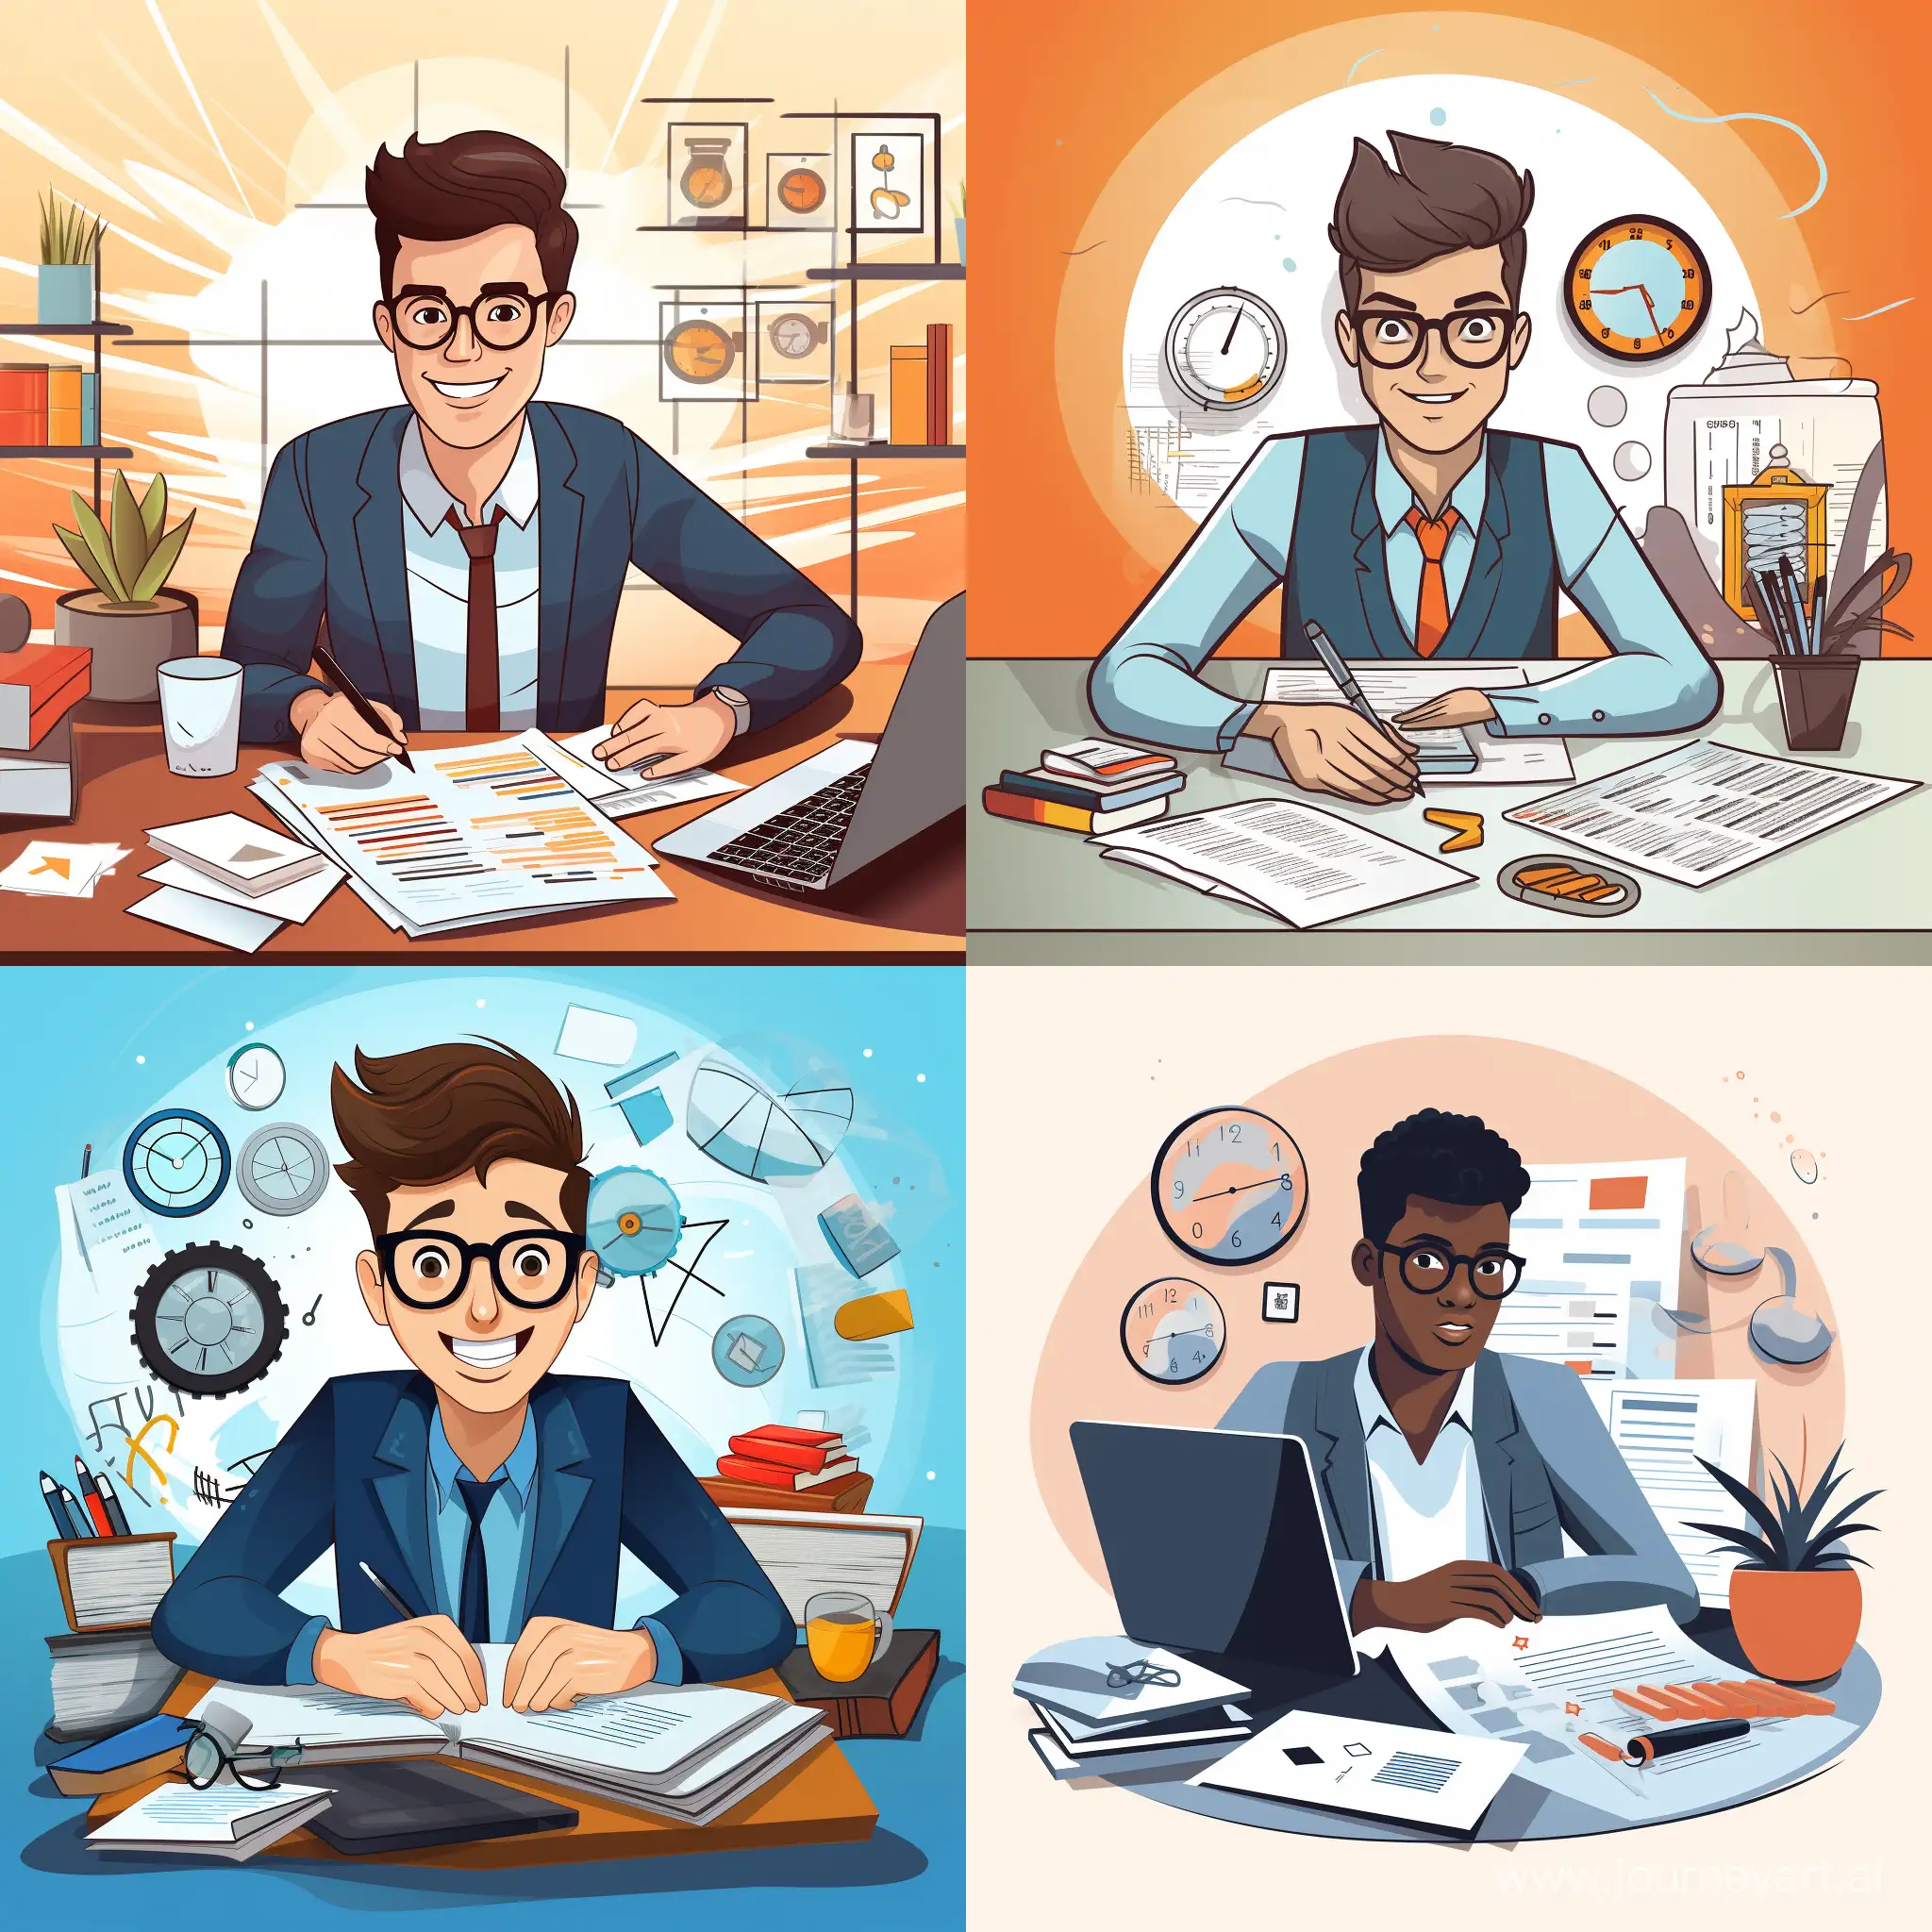 Generate a sophisticated 2D illustration for a modern explainer business video. The scene should portray a professional employee managing a pile of paperwork and a calculator, emphasizing the intricacies of manual calculations. The camera angle should be center-aligned, and the character design should be planned for a front-facing view, maintaining a consistent, non-cartoonish style with a contemporary multi-color palette.  Character Details:  Identity:  Gender-neutral, professional appearance. Maintain a refined and mature look, avoiding cartoonish features. Clothing:  Contemporary business attire with clean lines and minimalistic details. Pose and Expression:  Seated at a sleek, modern desk, facing the front. Display stress through subtle body language without exaggerated expressions. Workspace:  Pile of Paperwork:  Neatly arranged papers on the desk, employing a consistent and modern geometric style. Utilize the specified 4-color palette: 